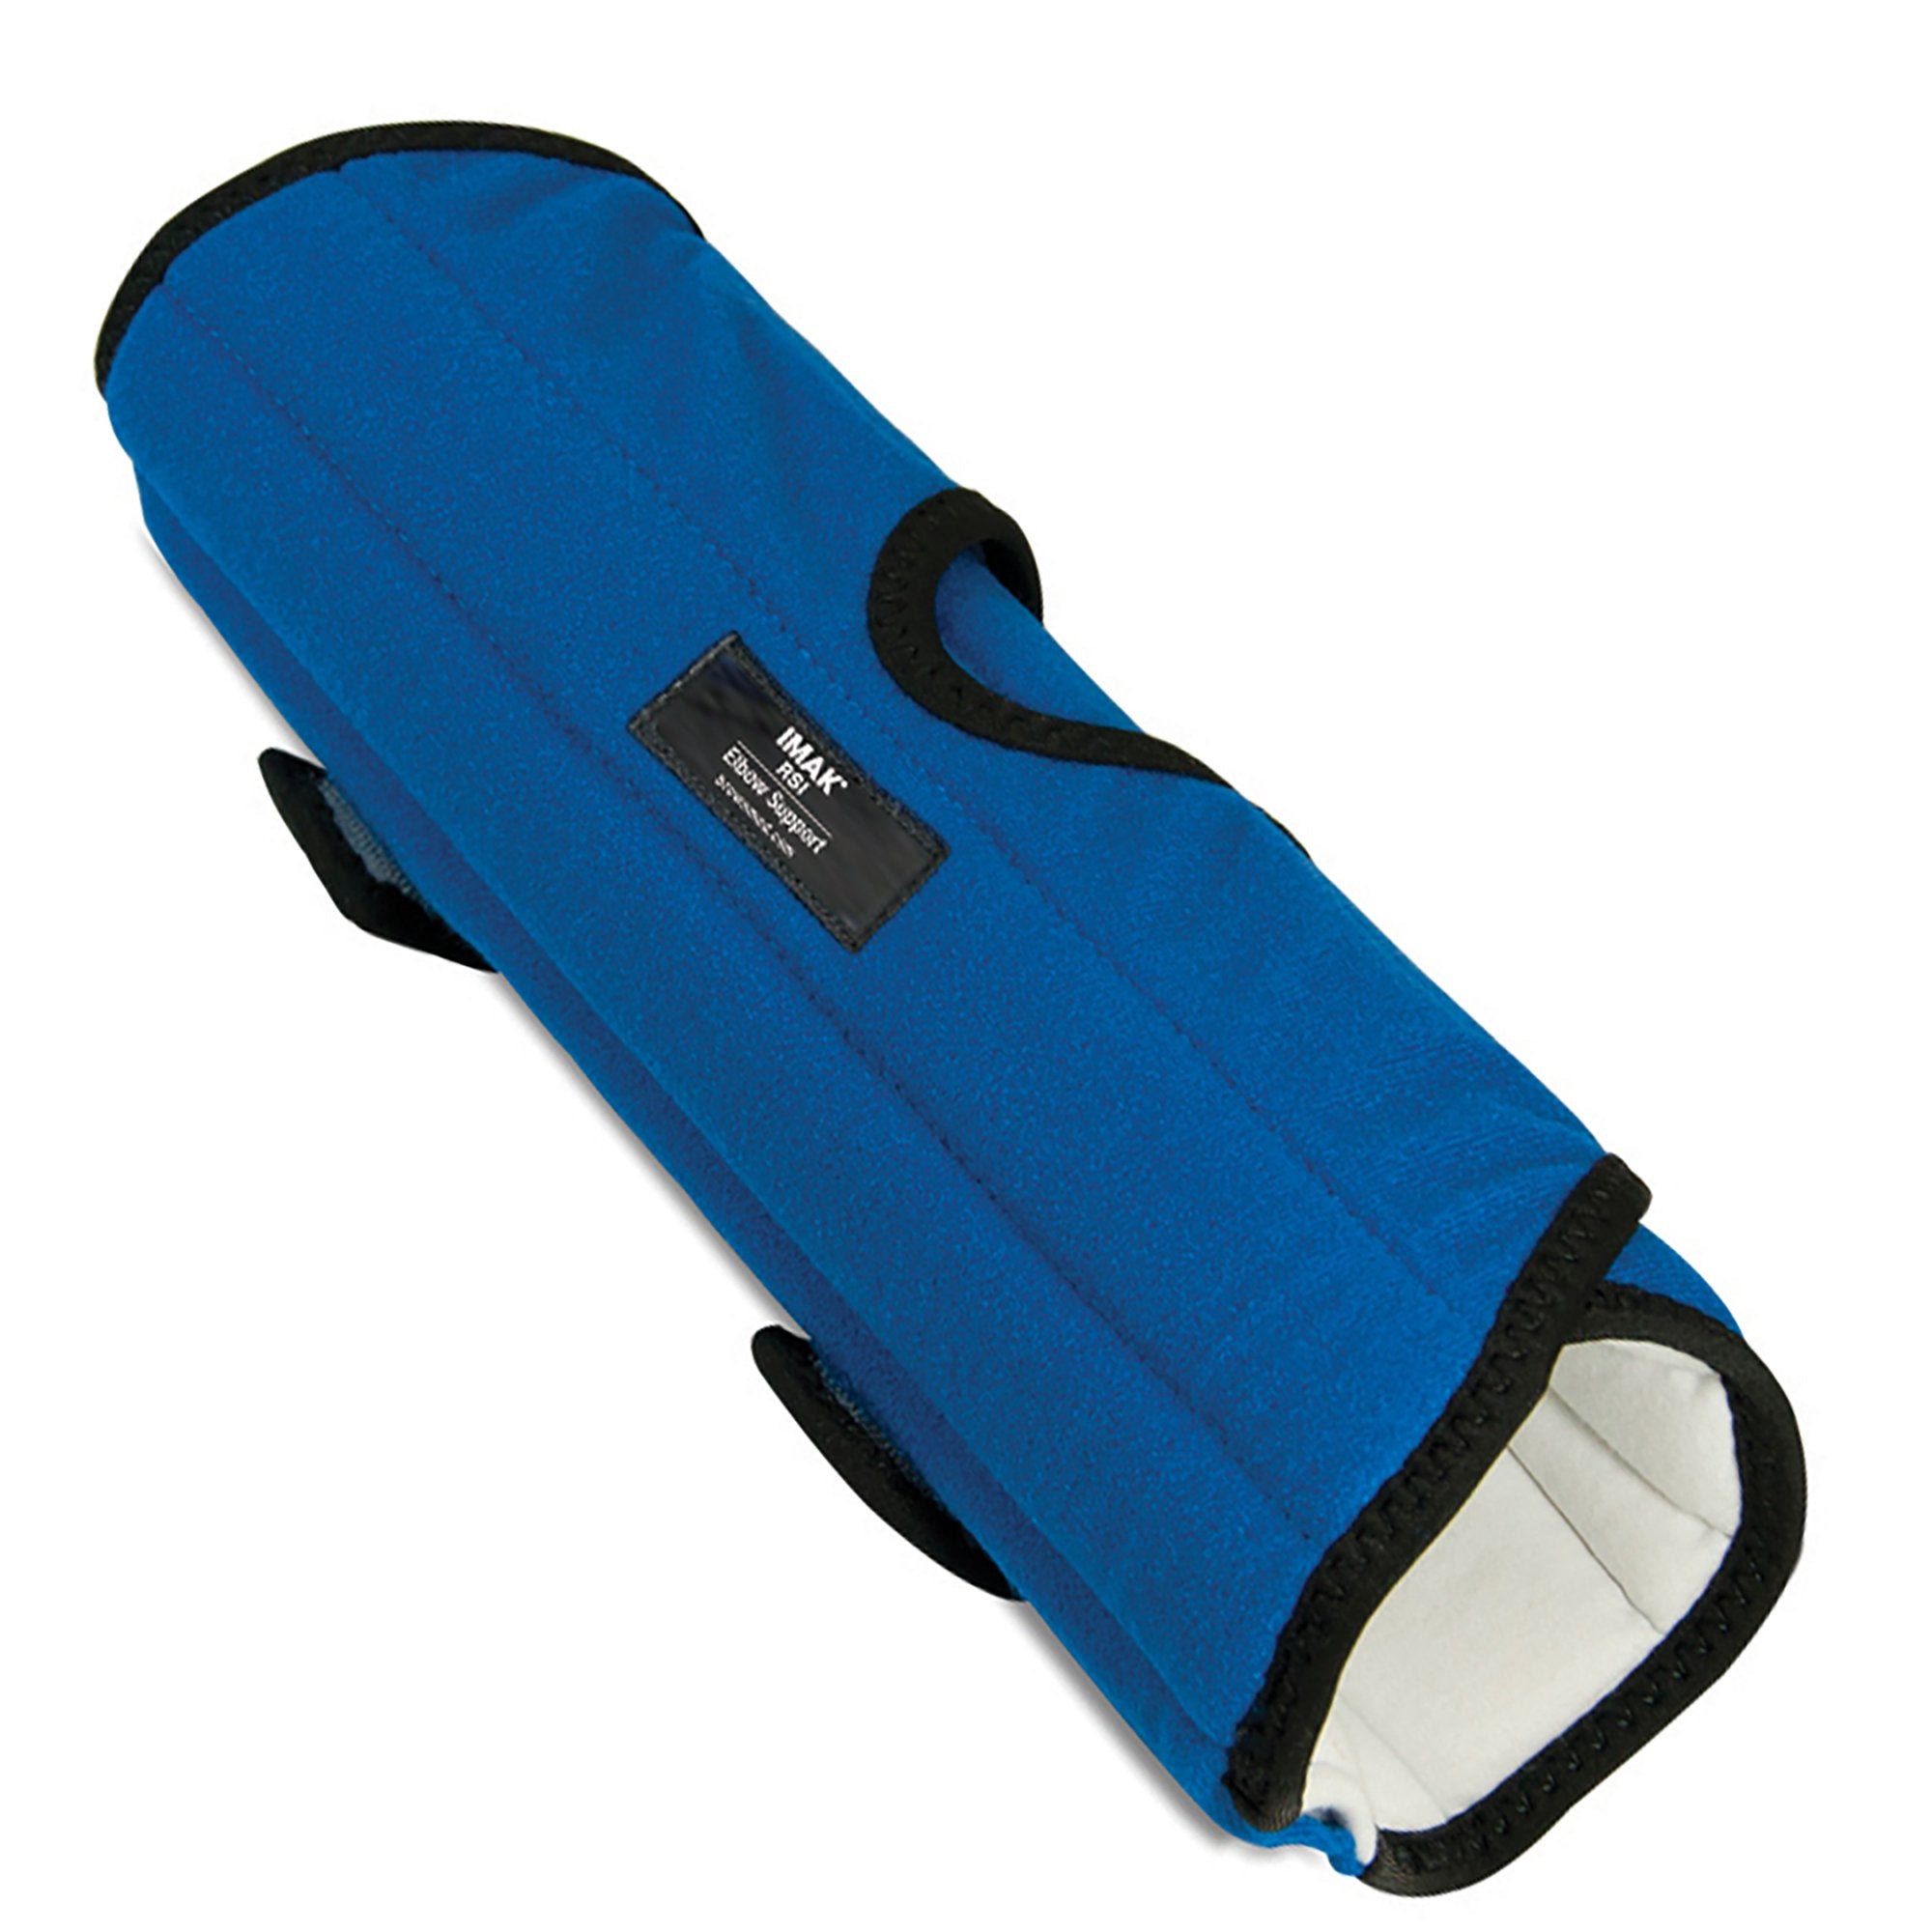 Elbow Support One Size Fits Most Hook and Loop Strap Fastening Blue